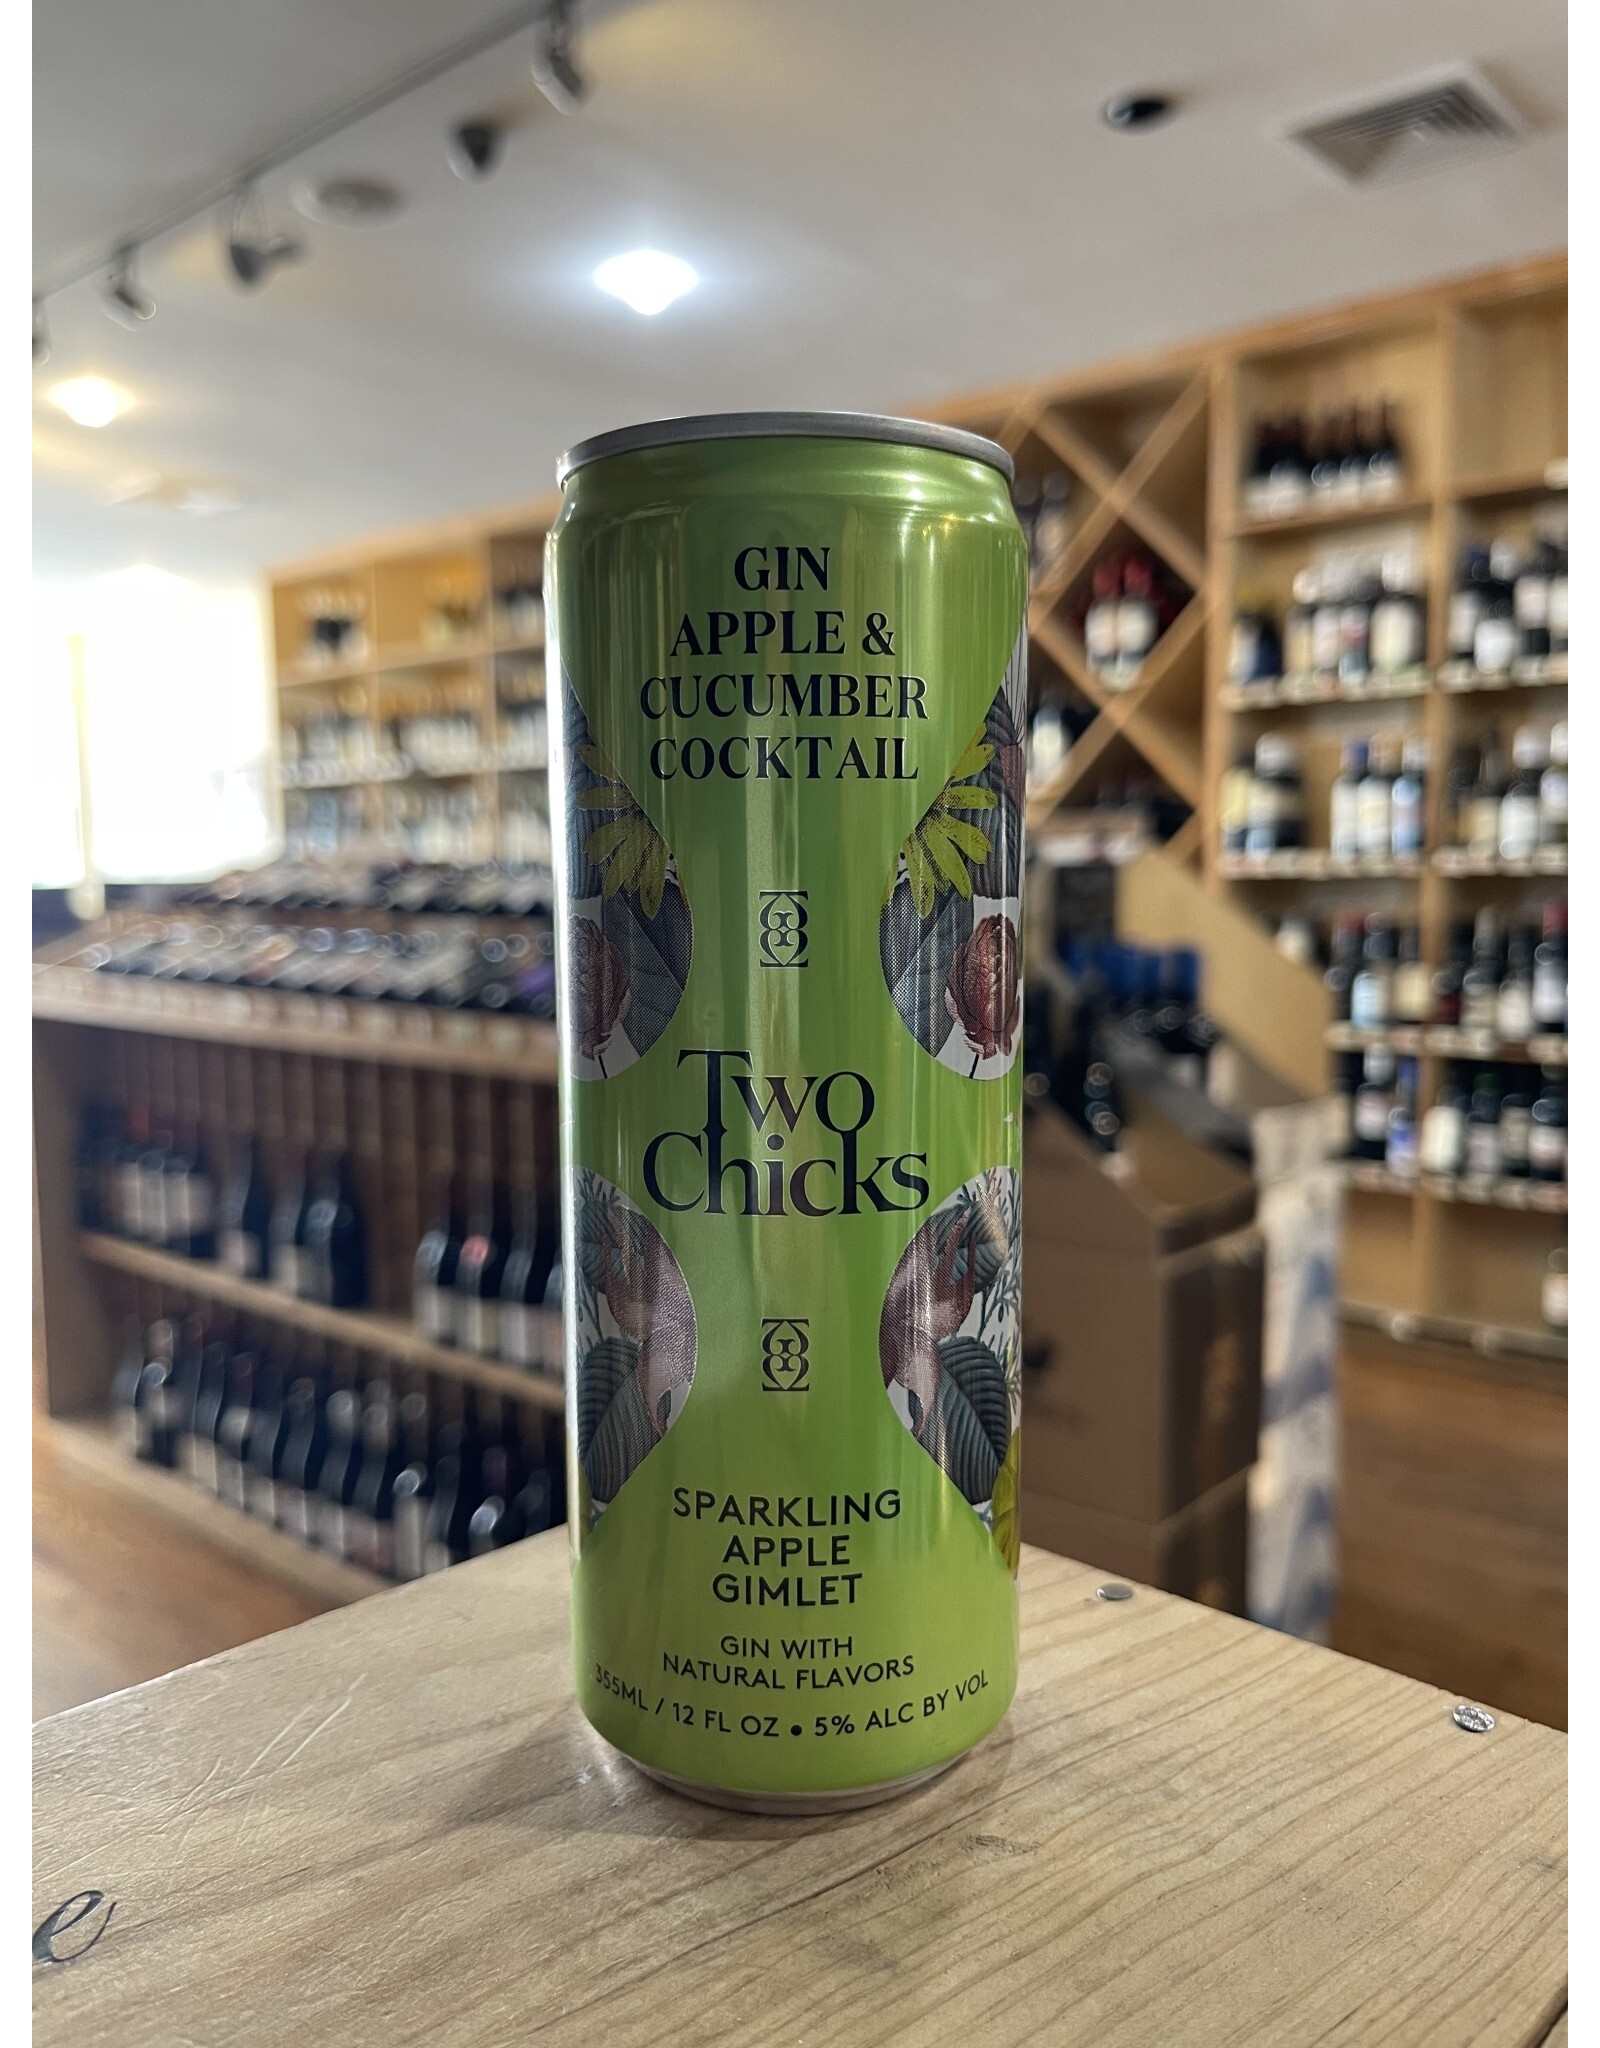 USA Two Chicks Gin Apple & Cucumber Cocktail 355ml